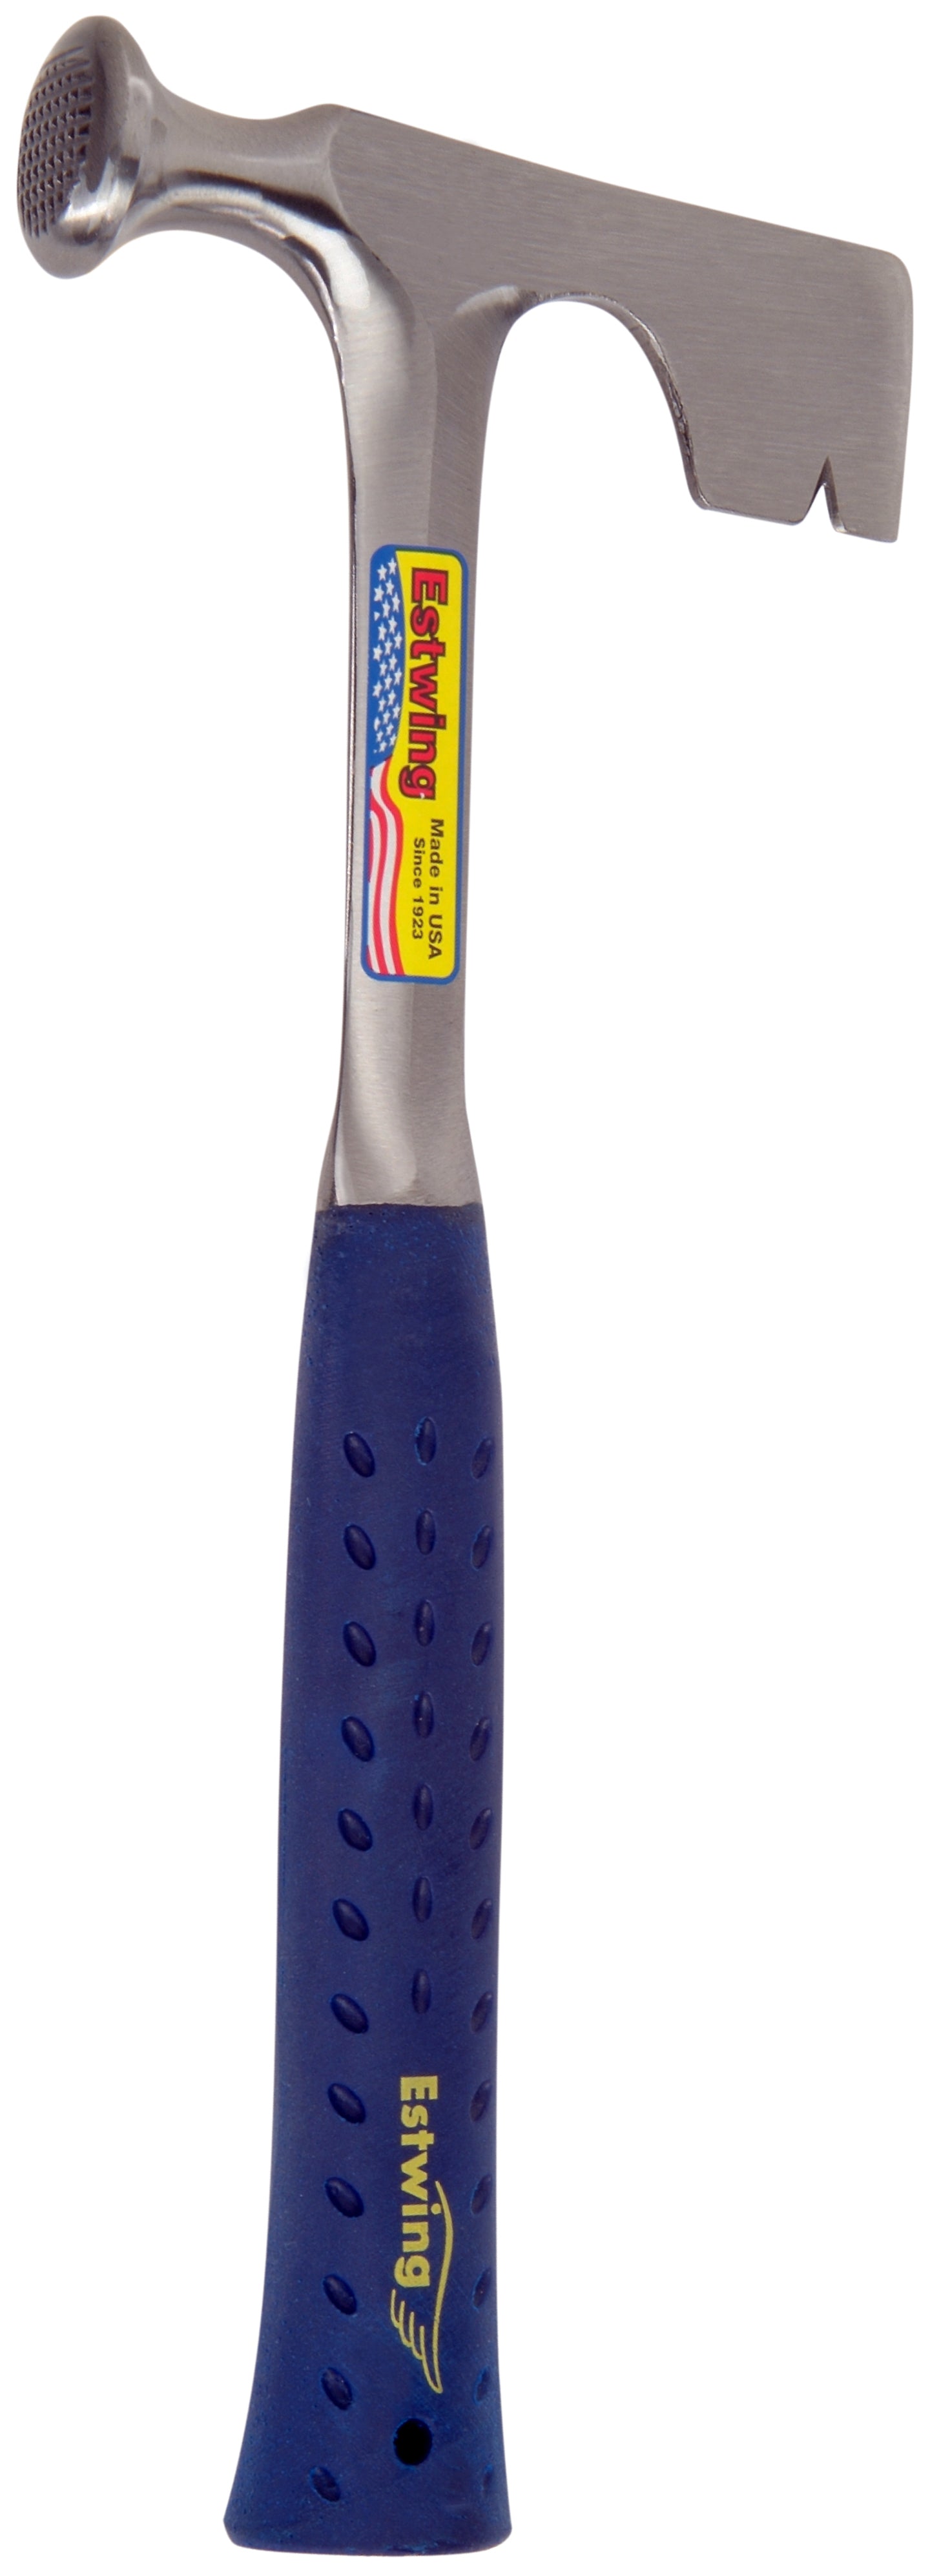 Estwing E3-11 Milled Face Drywall Hammer (E3-11)